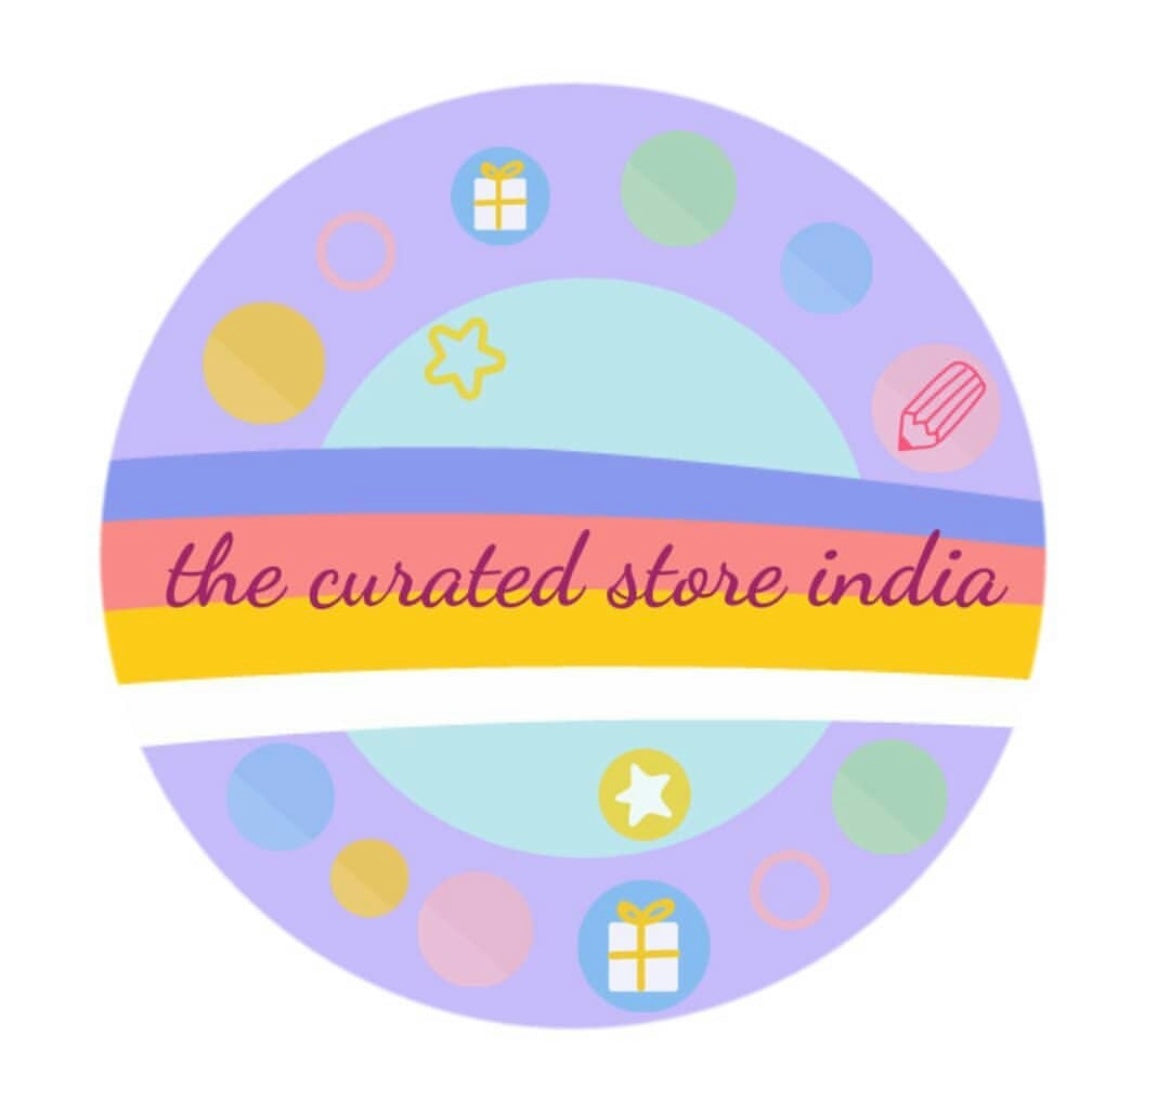 The Curated Store India